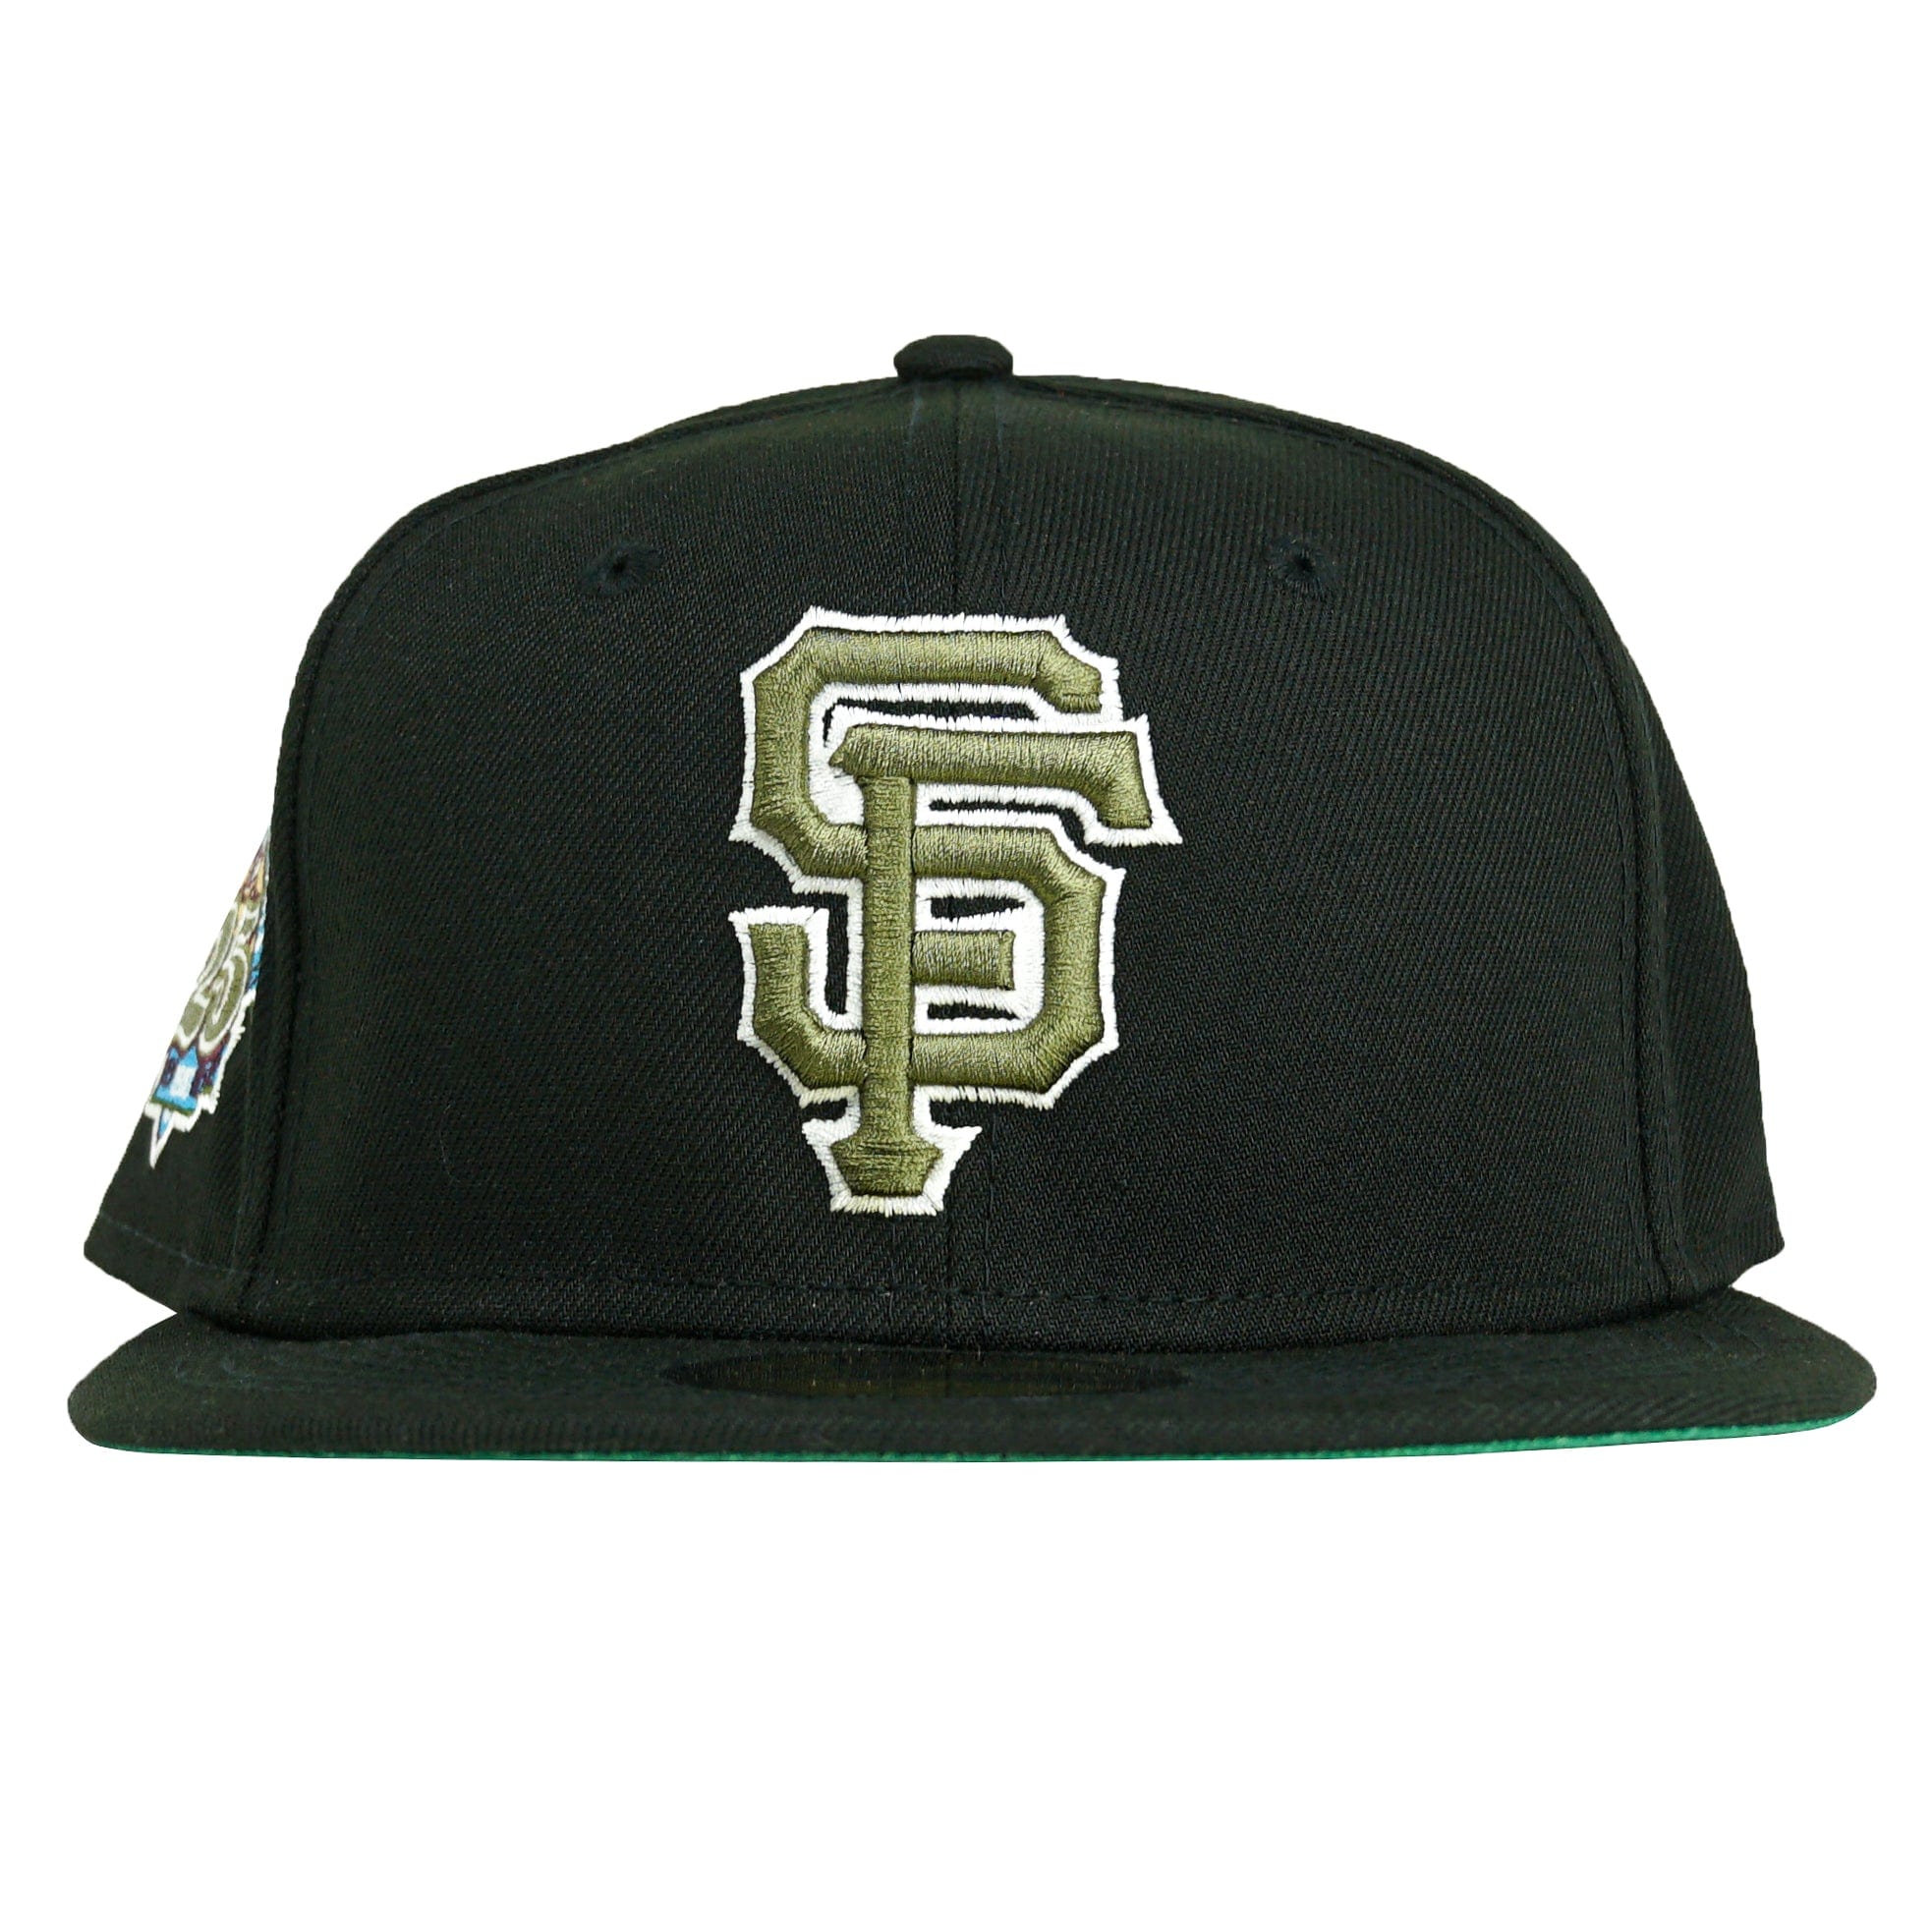 San Francisco Giants 25th Anniversary Botanical 59Fifty Fitted Hat in black - New Era - State Of Flux